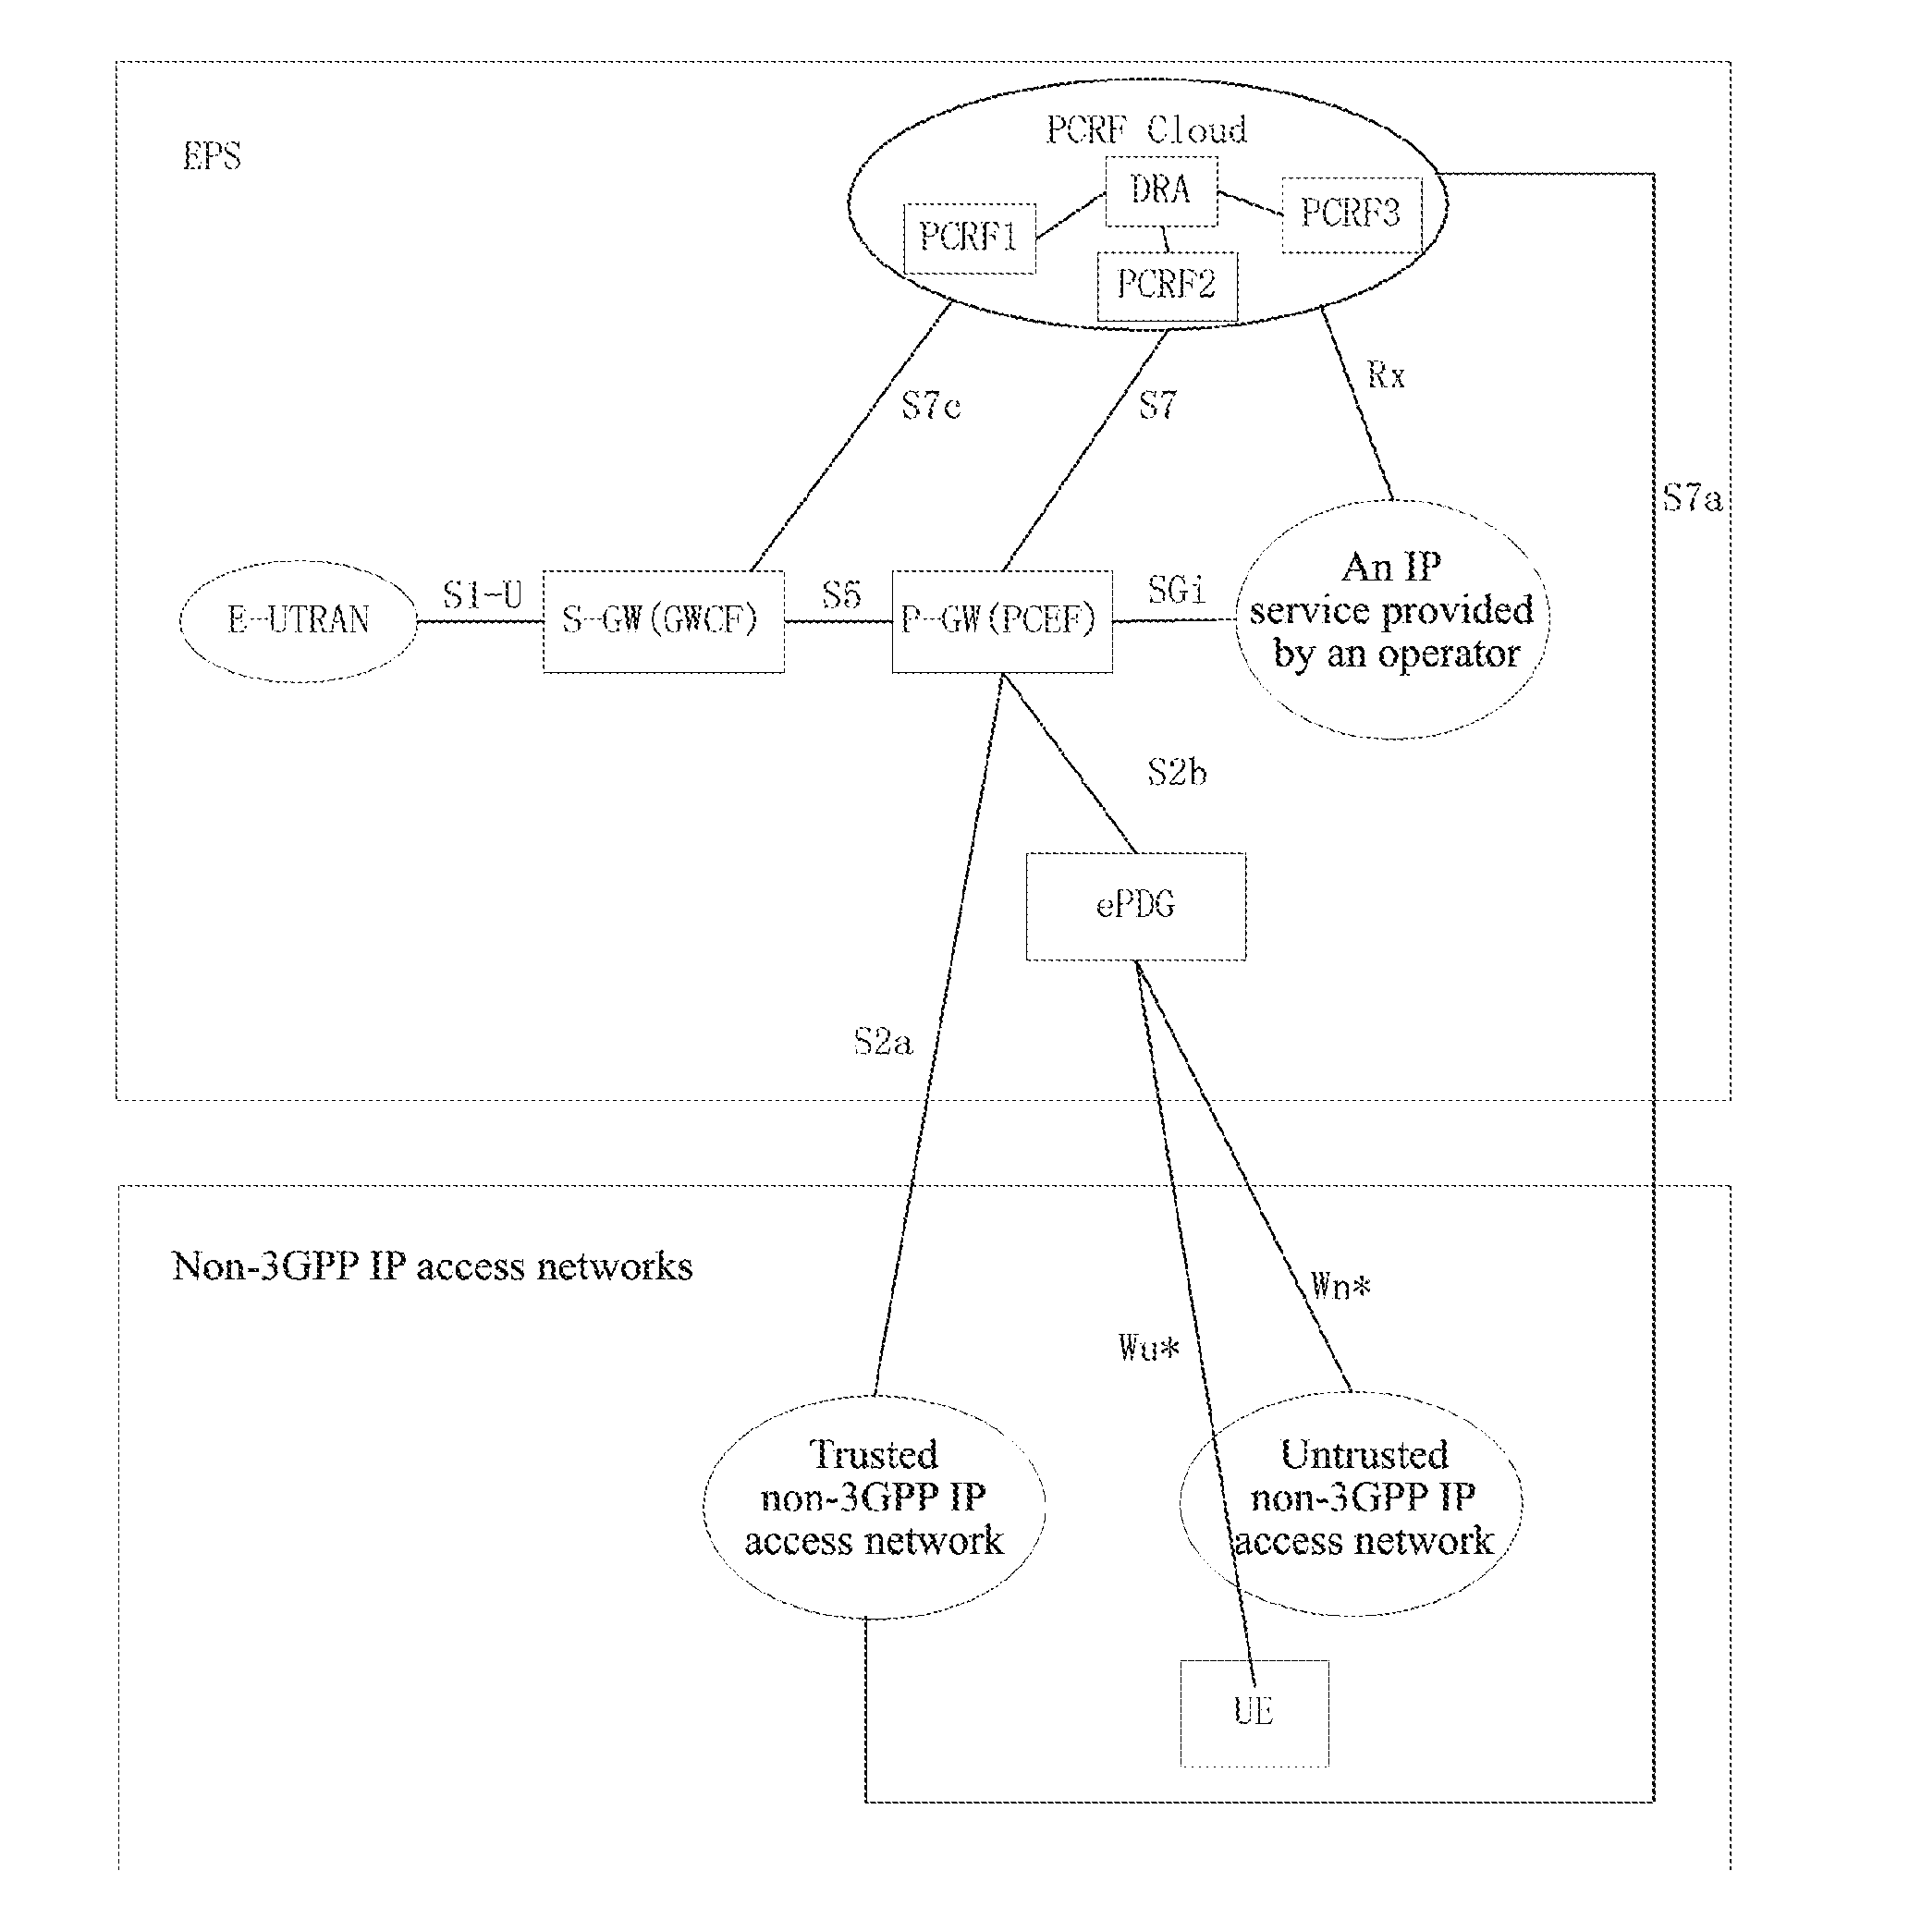 Method for selecting a policy and charging rules function server on a non-roaming scene